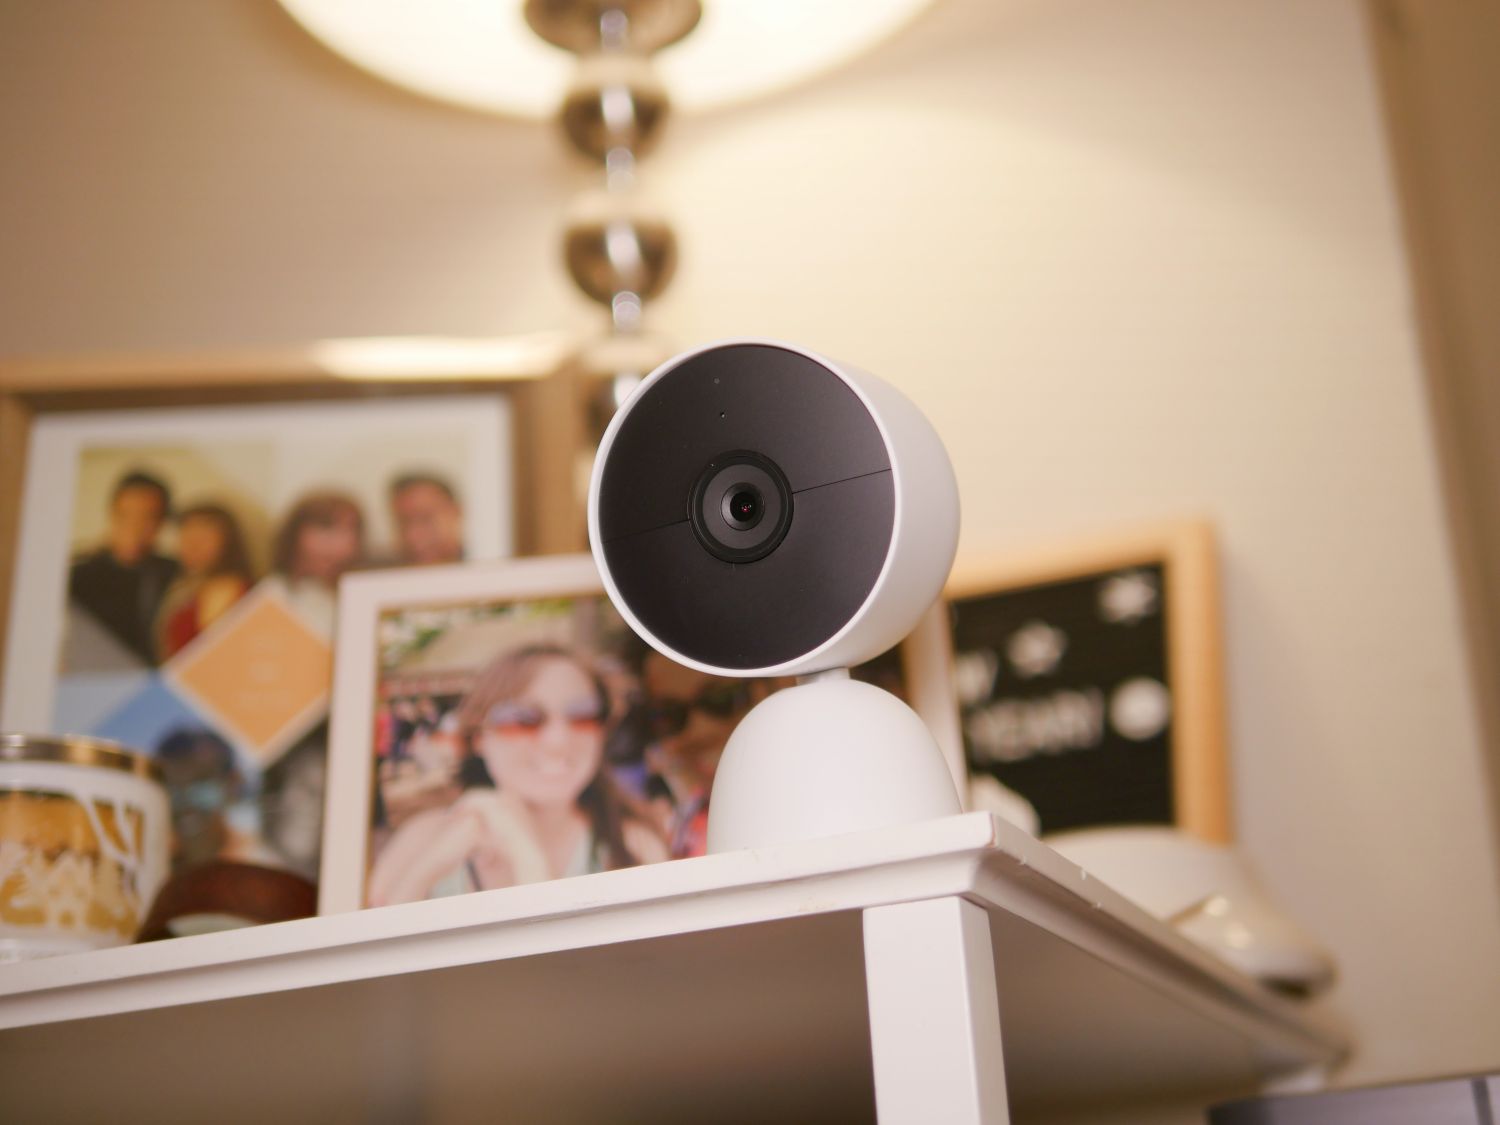 Google Nest Cam (Battery) Review: The Anywhere Home Camera